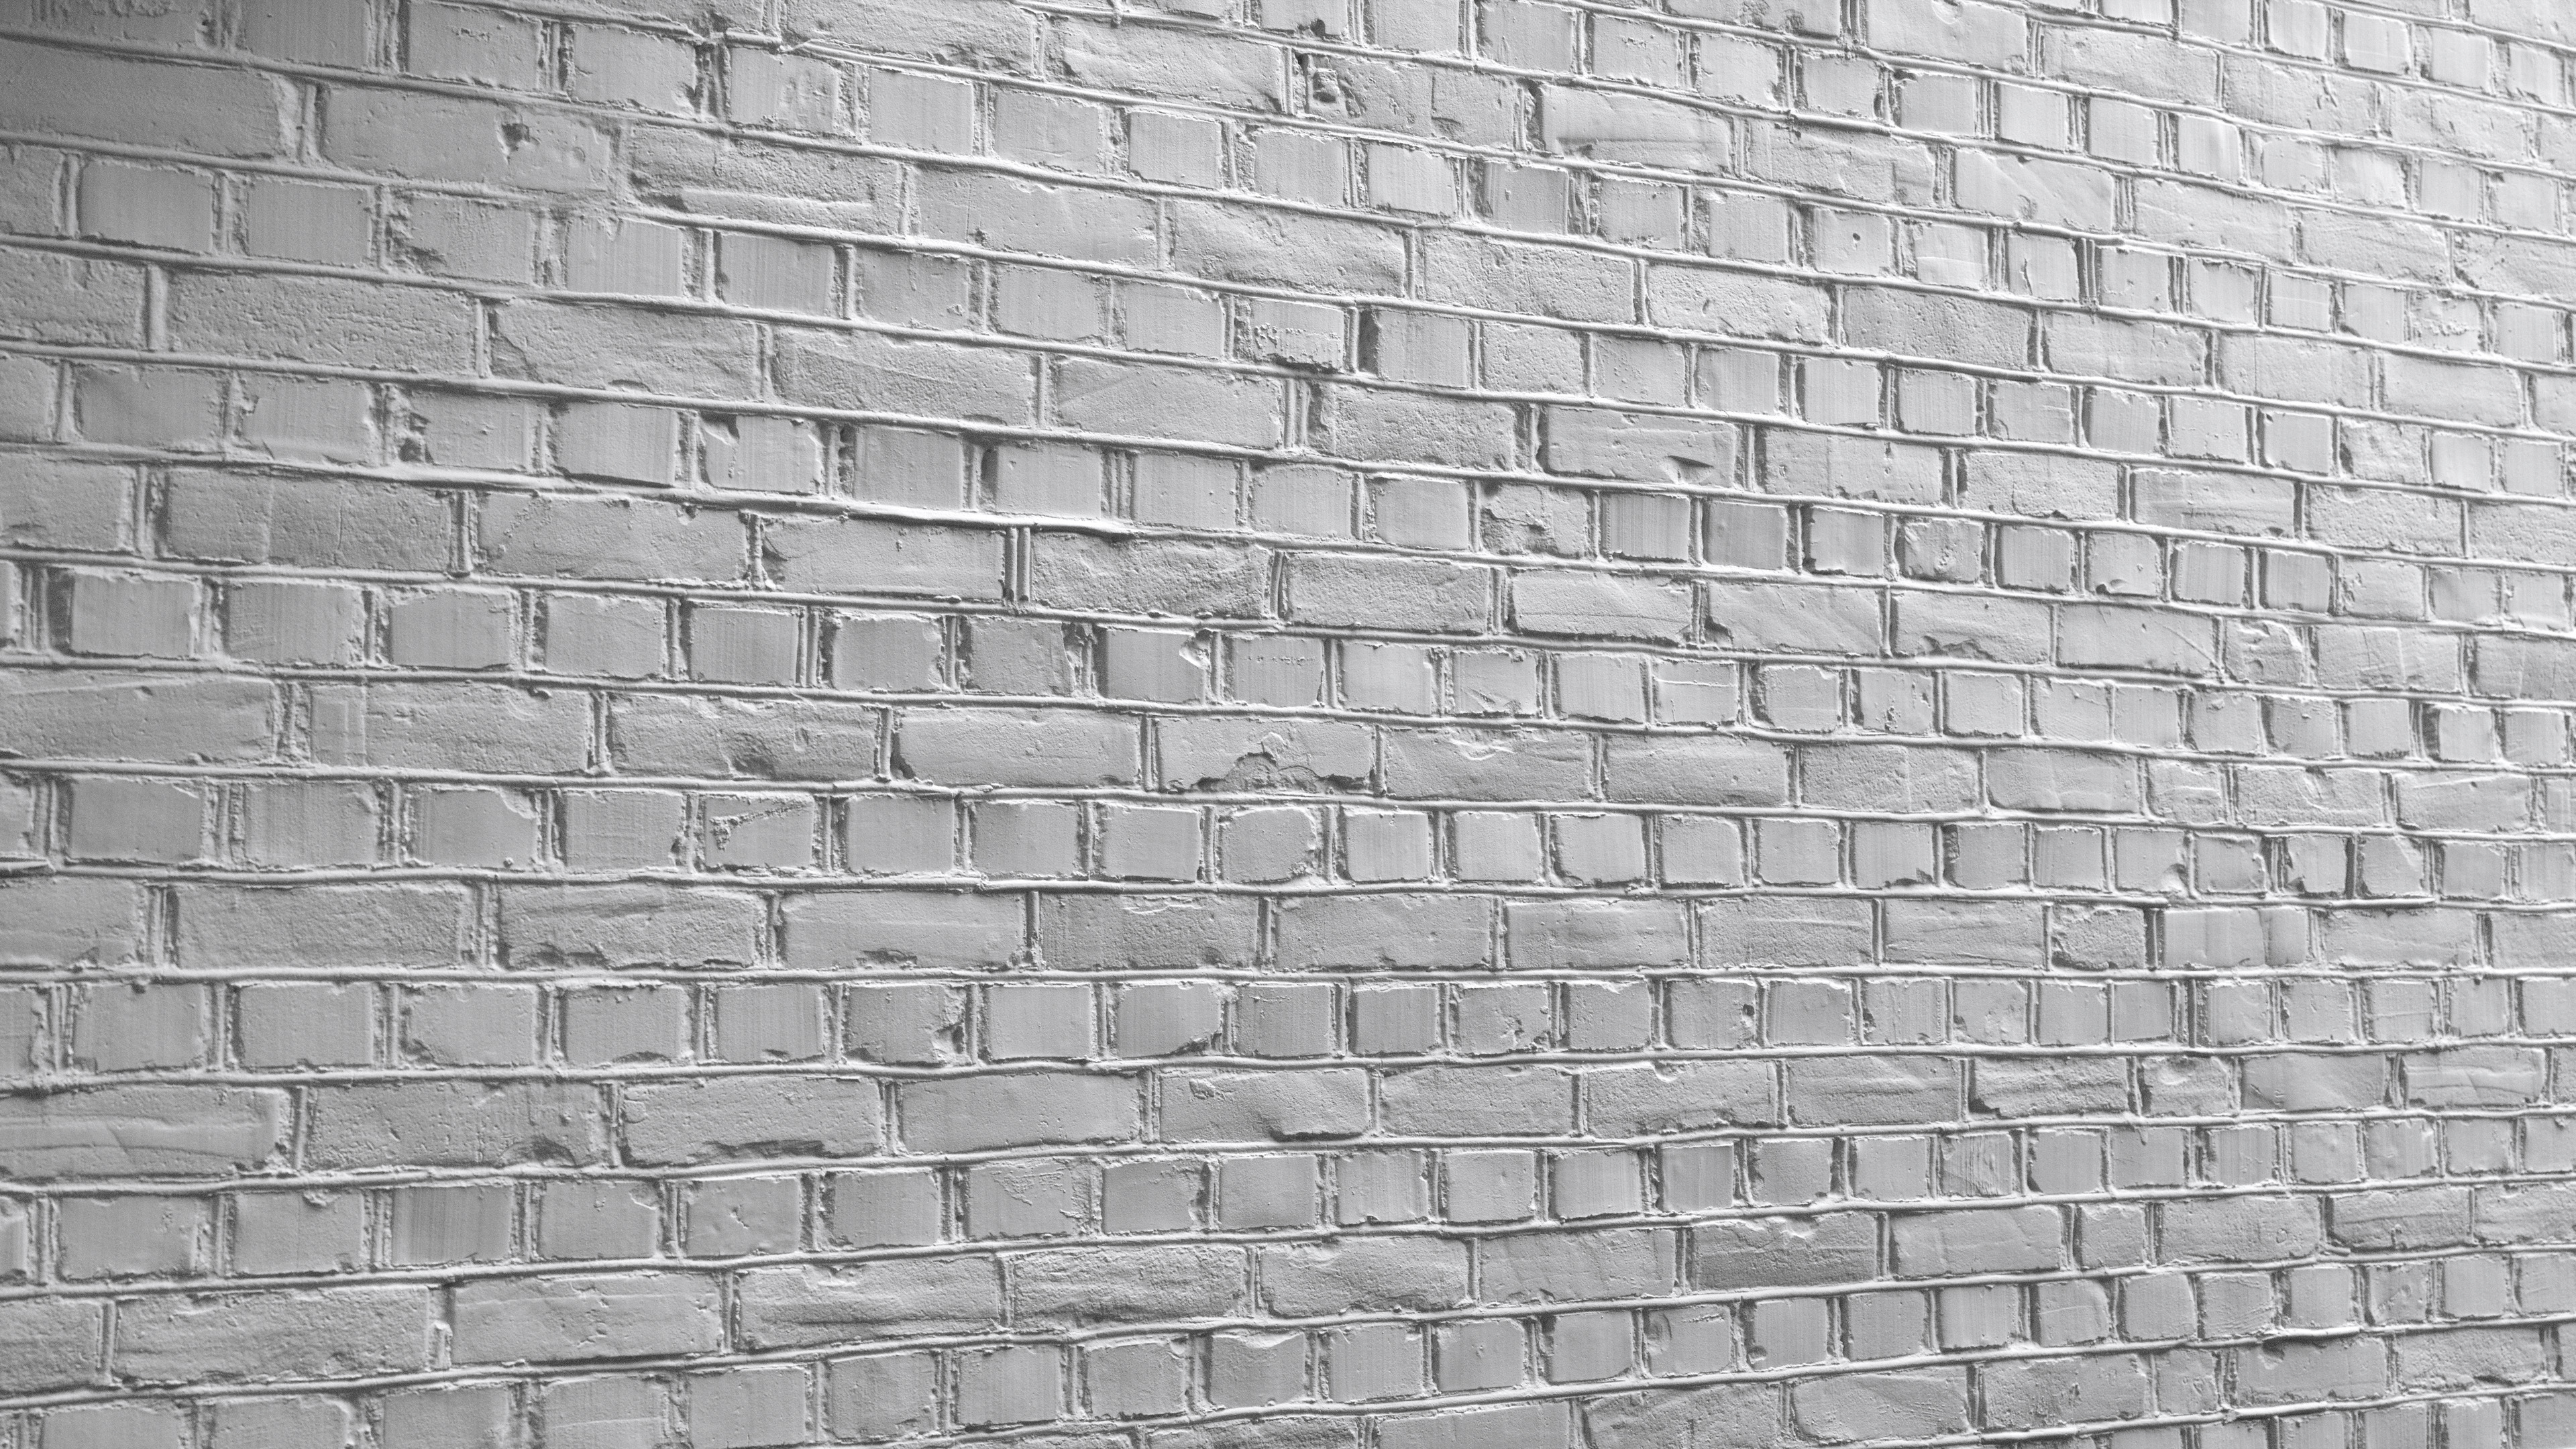 3d Scanned Brick Wall 2 5x2 5 Meters - texture roblox bricks and other decals tf2mapsnet